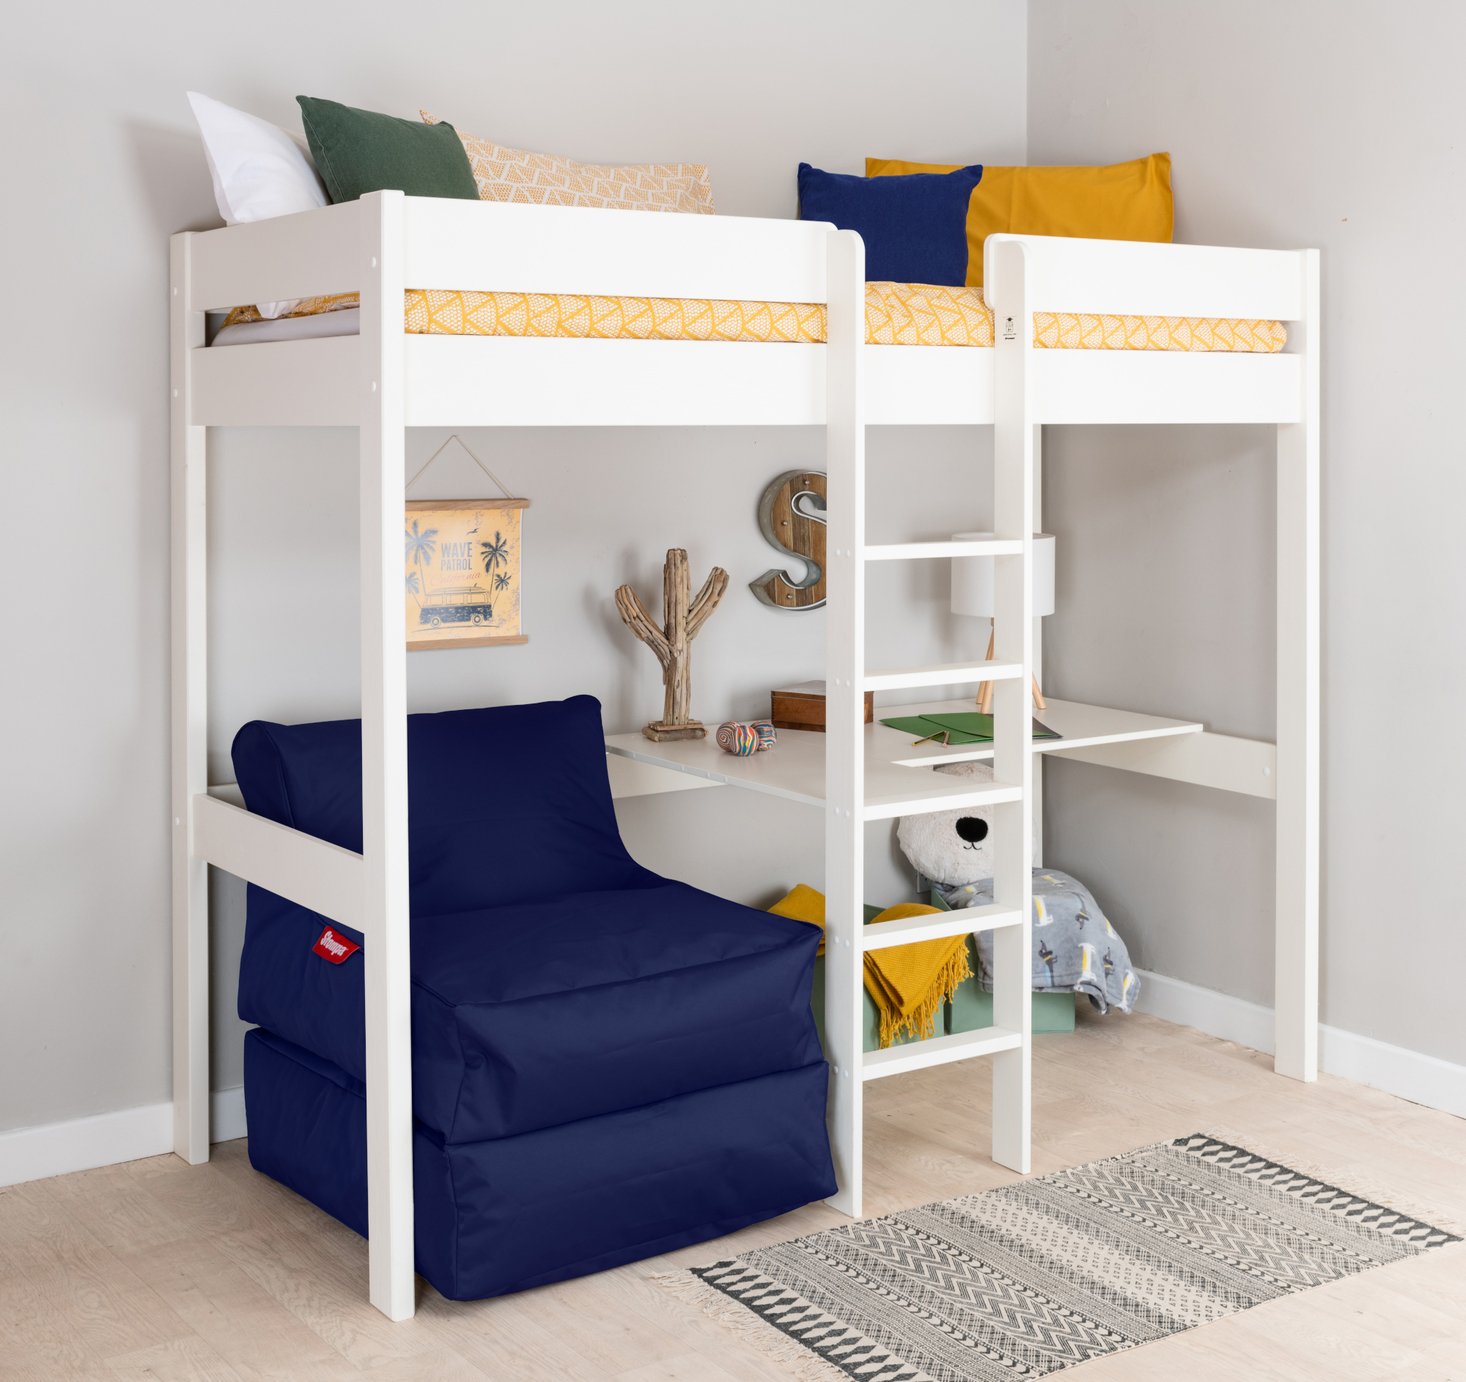 Stompa White High Sleeper Bed, Desk & Navy Chairbed